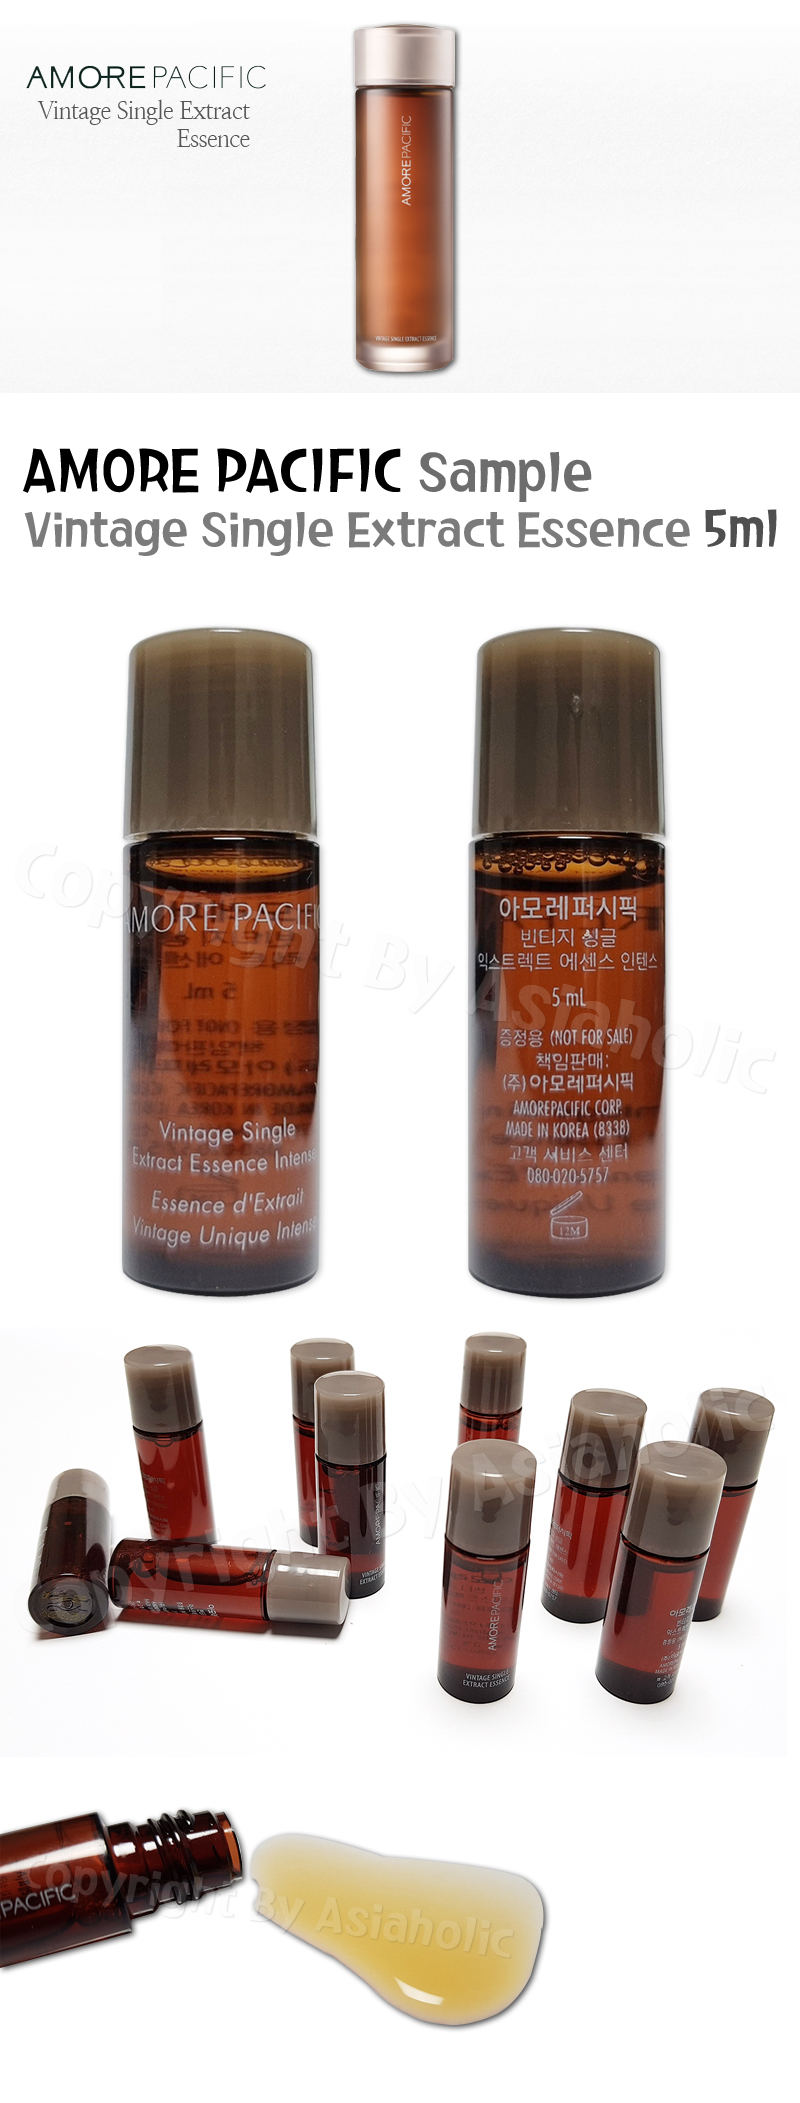 AMORE PACIFIC Vintage Single Extract Essence 5ml x 9pcs (45ml) Sample Newest Version